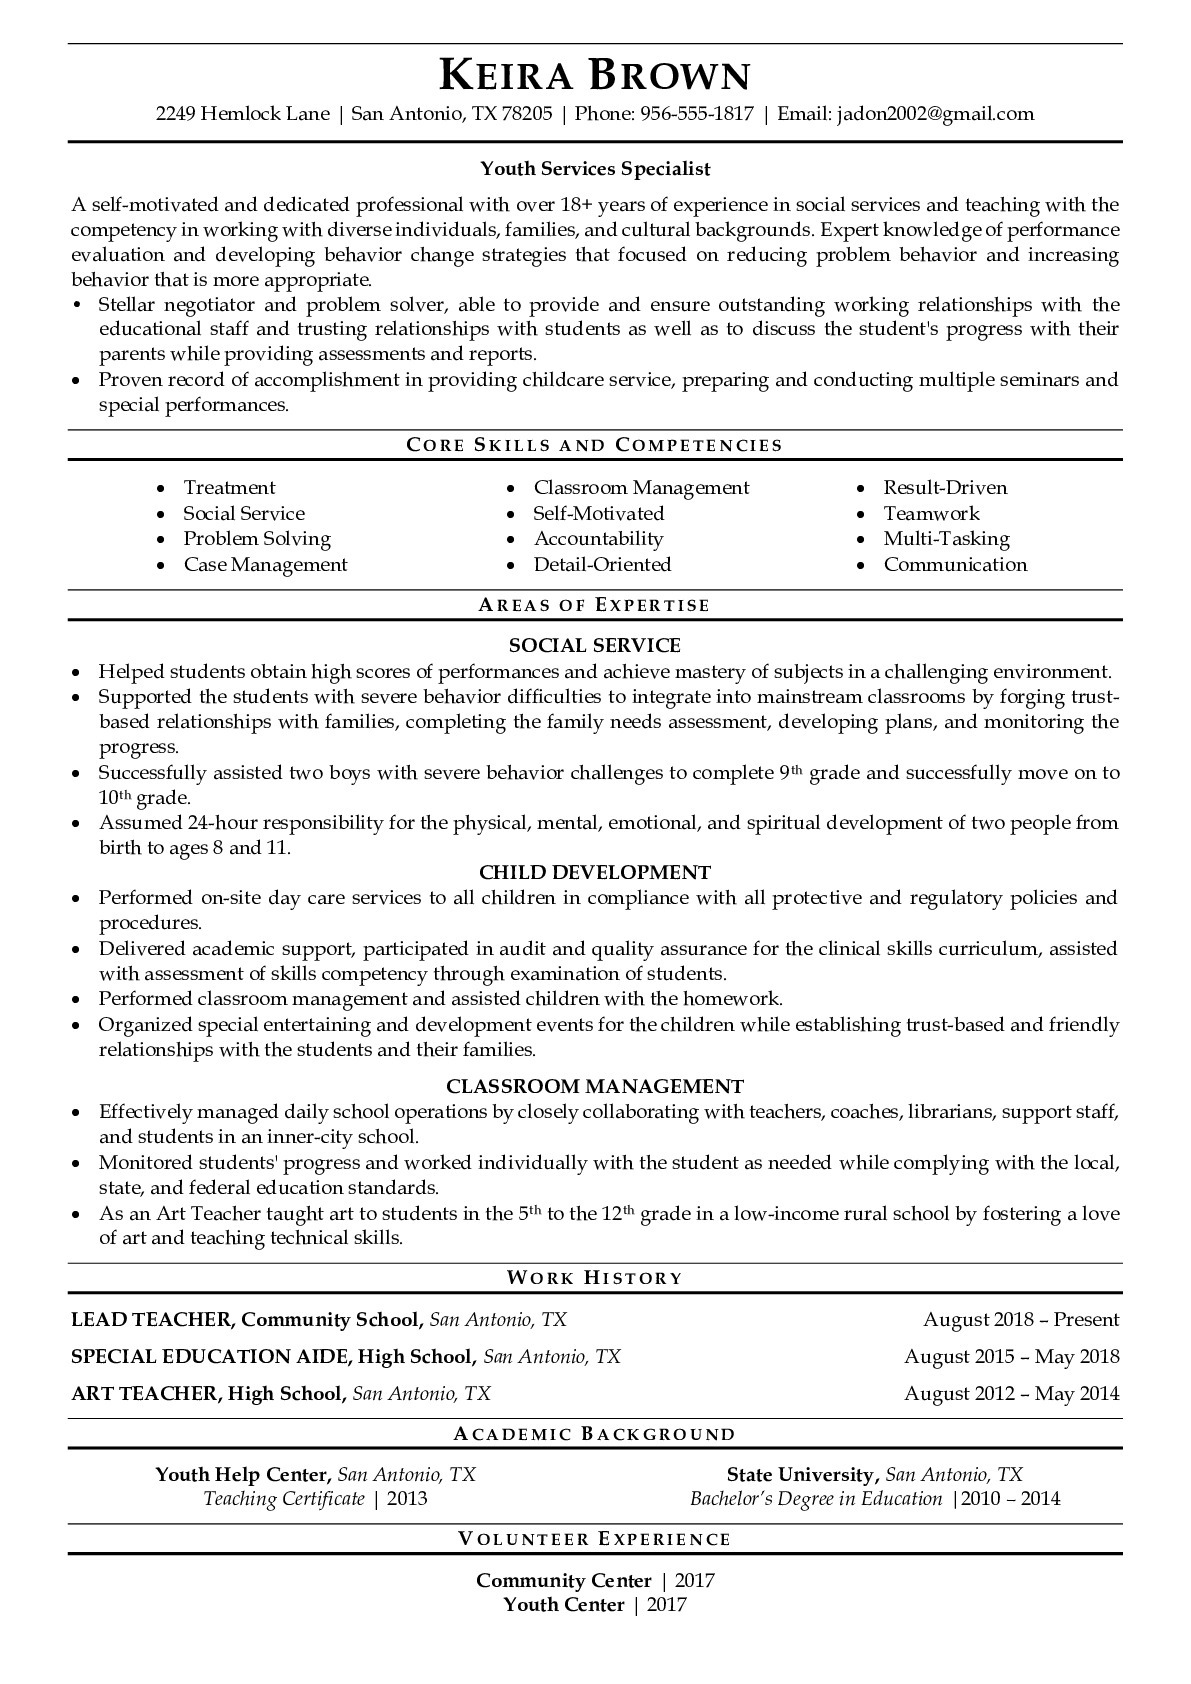 Resume Example for Youth Services Specialist